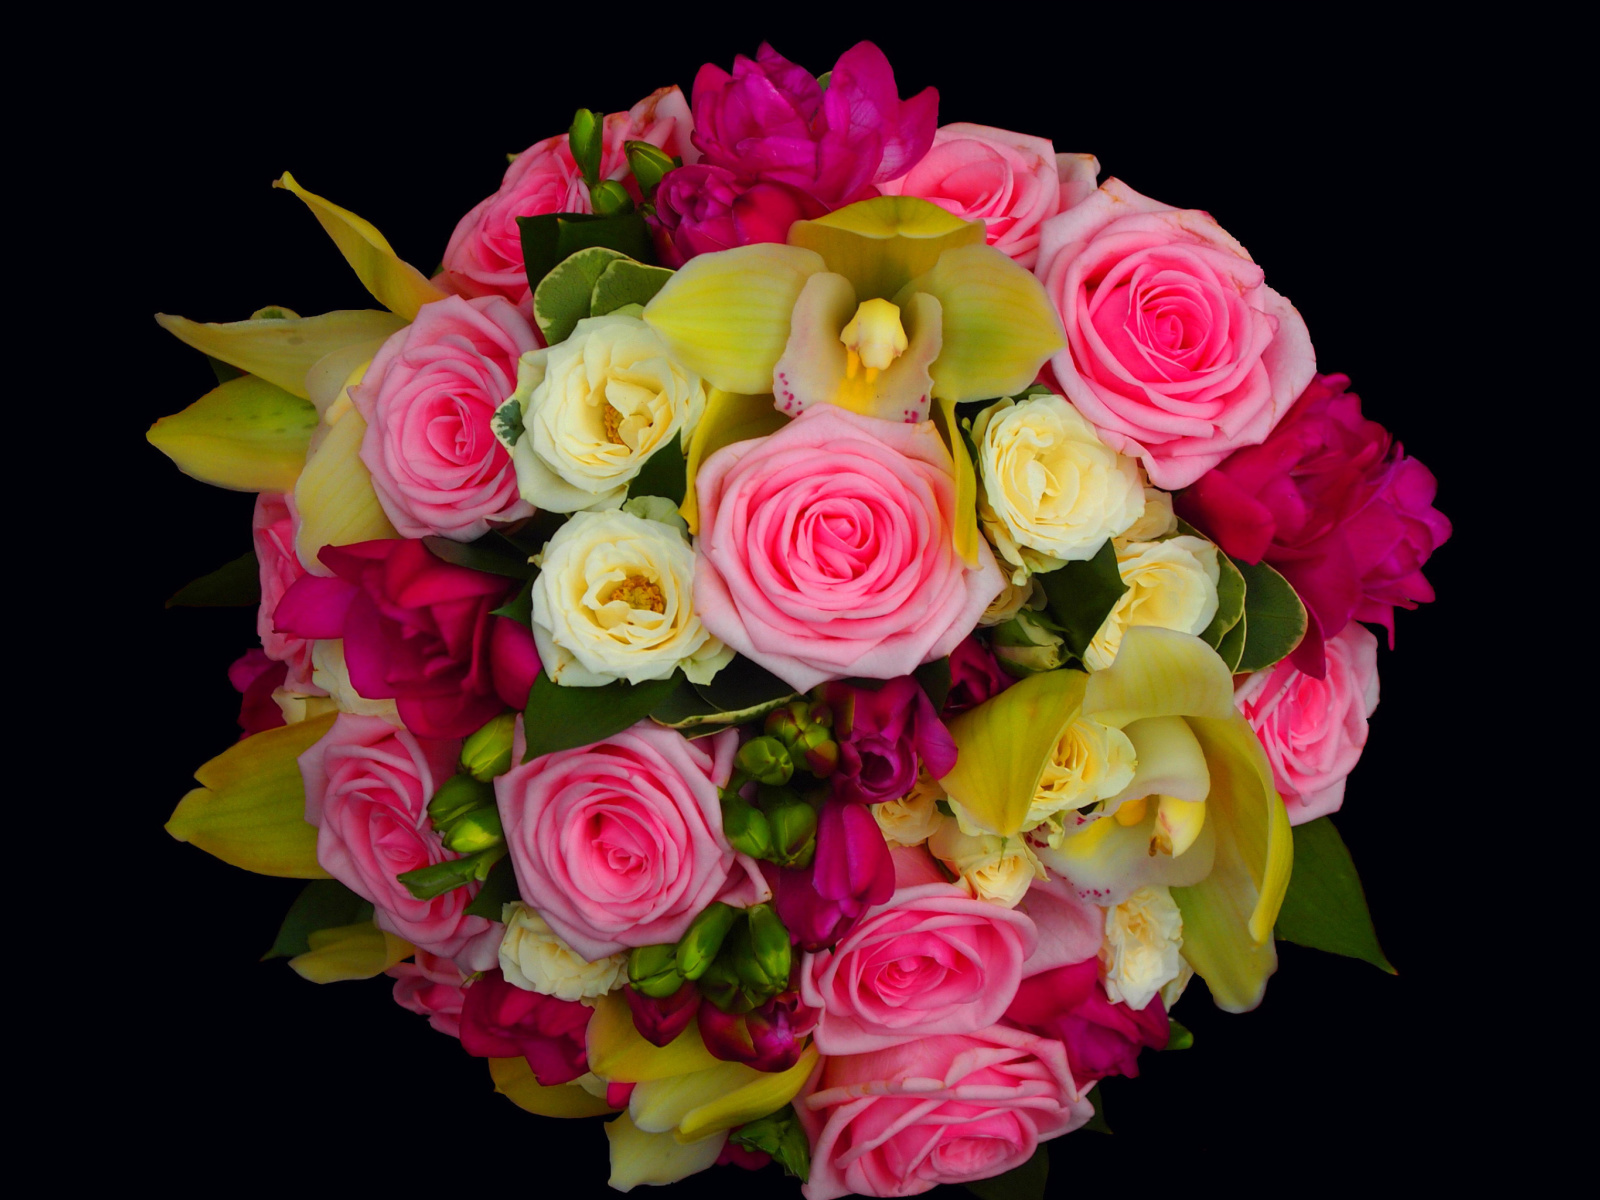 Bouquet of roses and yellow orchid, floristry screenshot #1 1600x1200